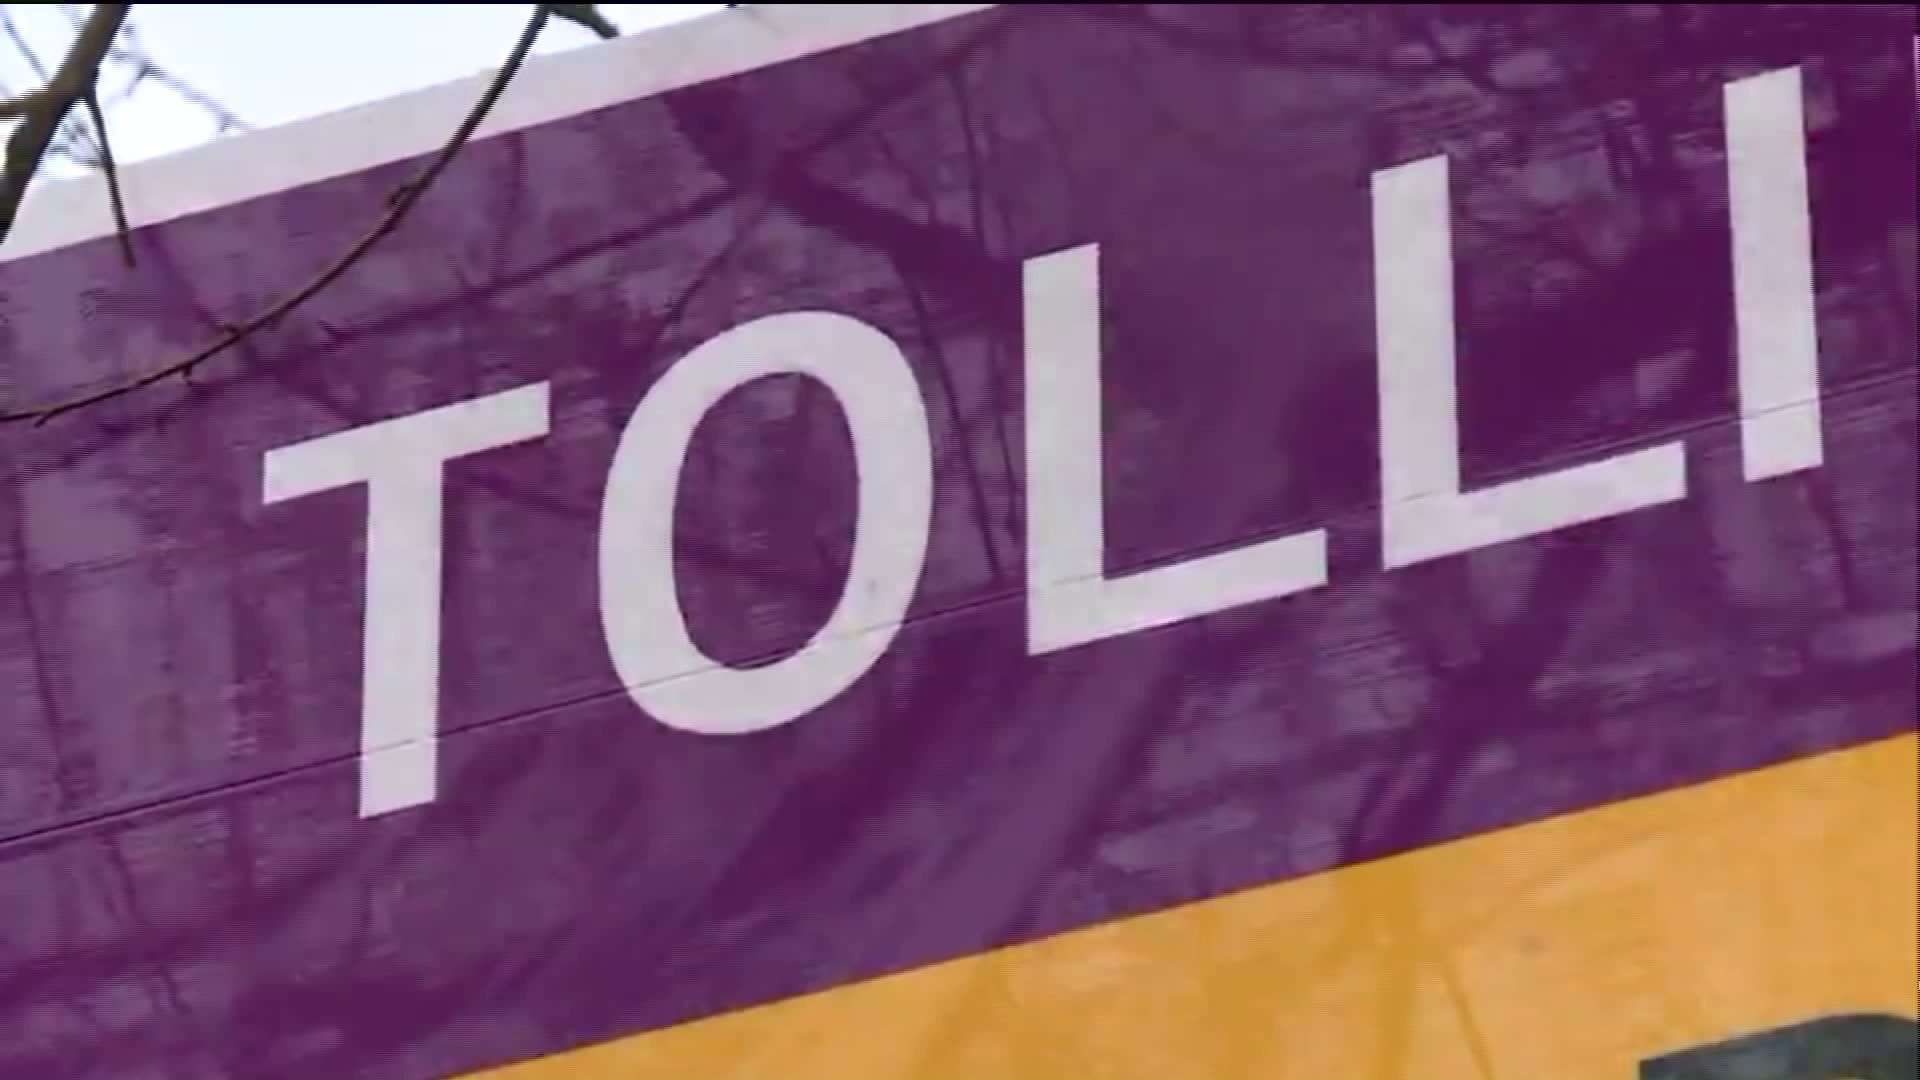 Lawmakers talking about bringing back tolls